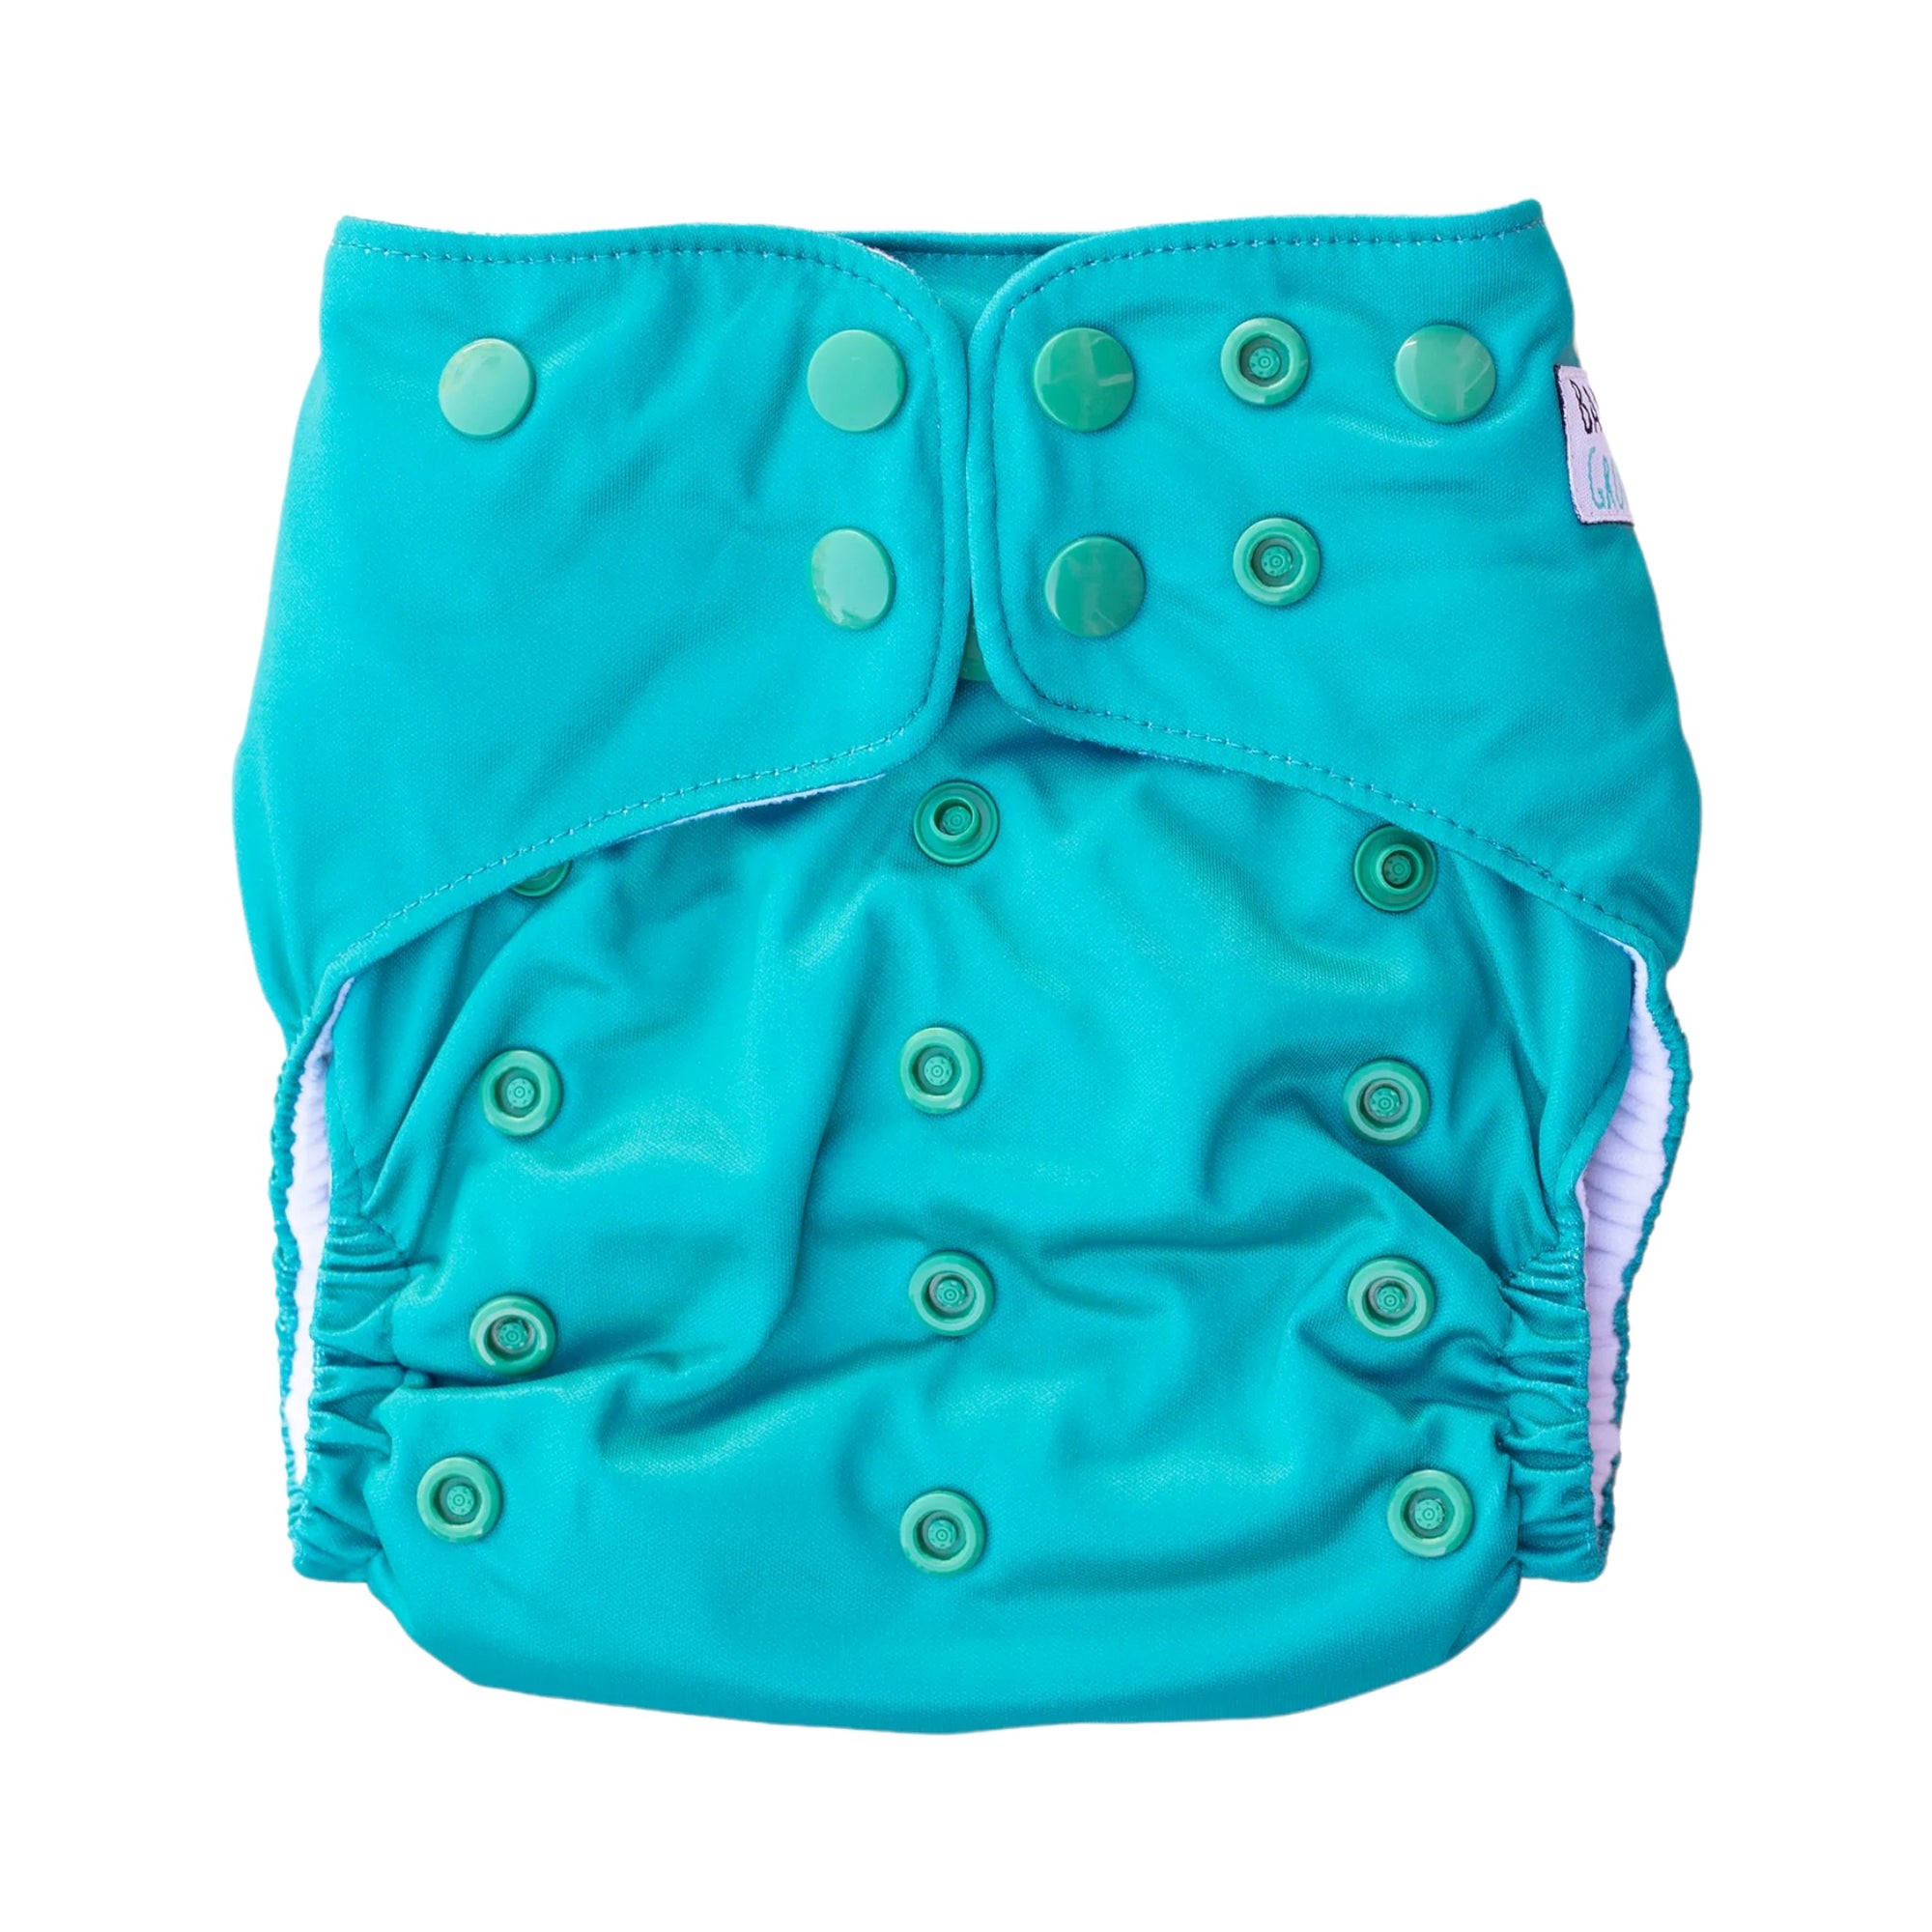 Bamboo Grove | Modern Cloth Nappy - (Turquoise)